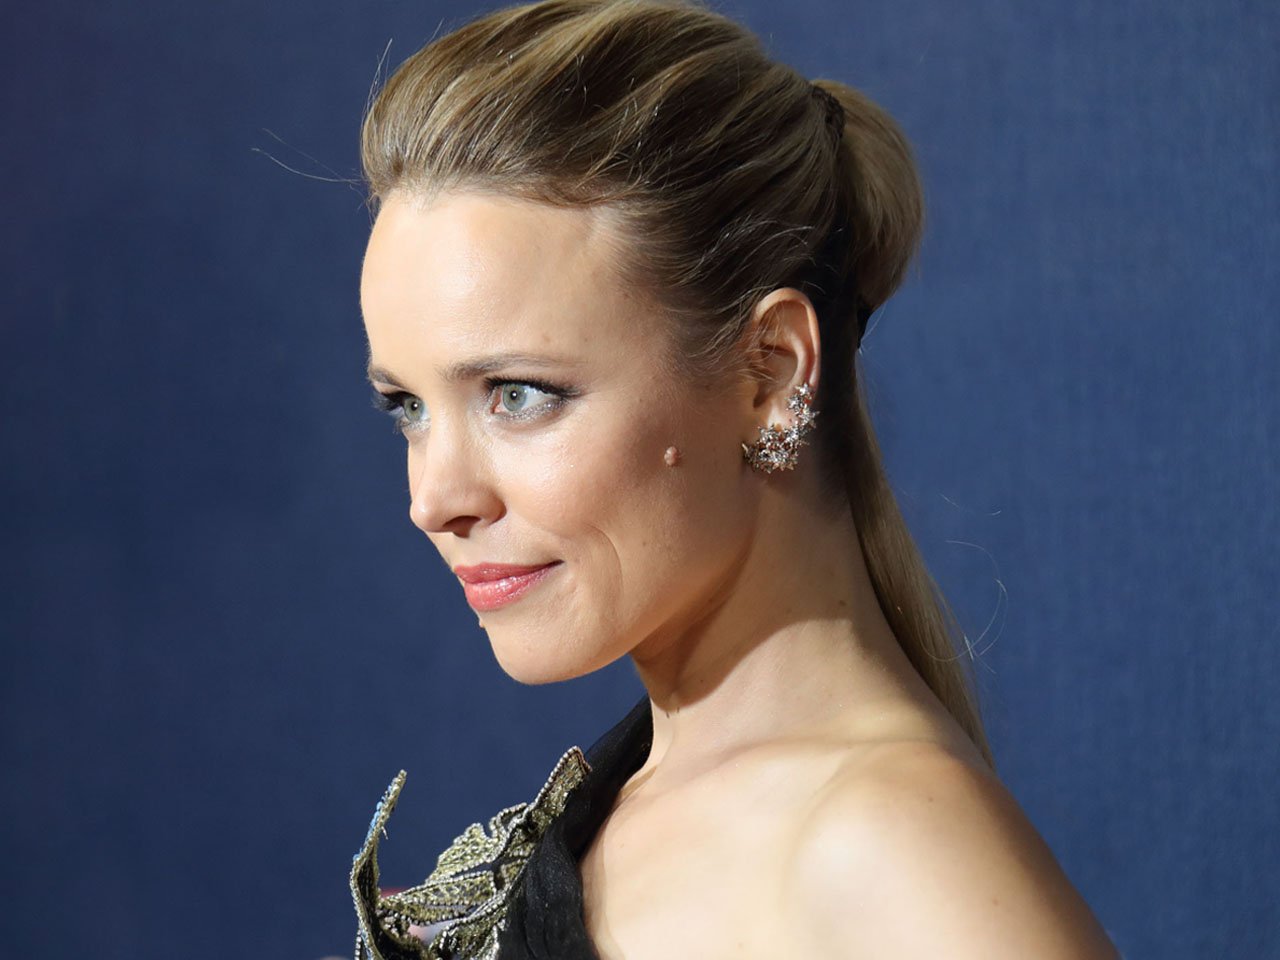 Rachel McAdams Says She Was Harassed By Director James Toback